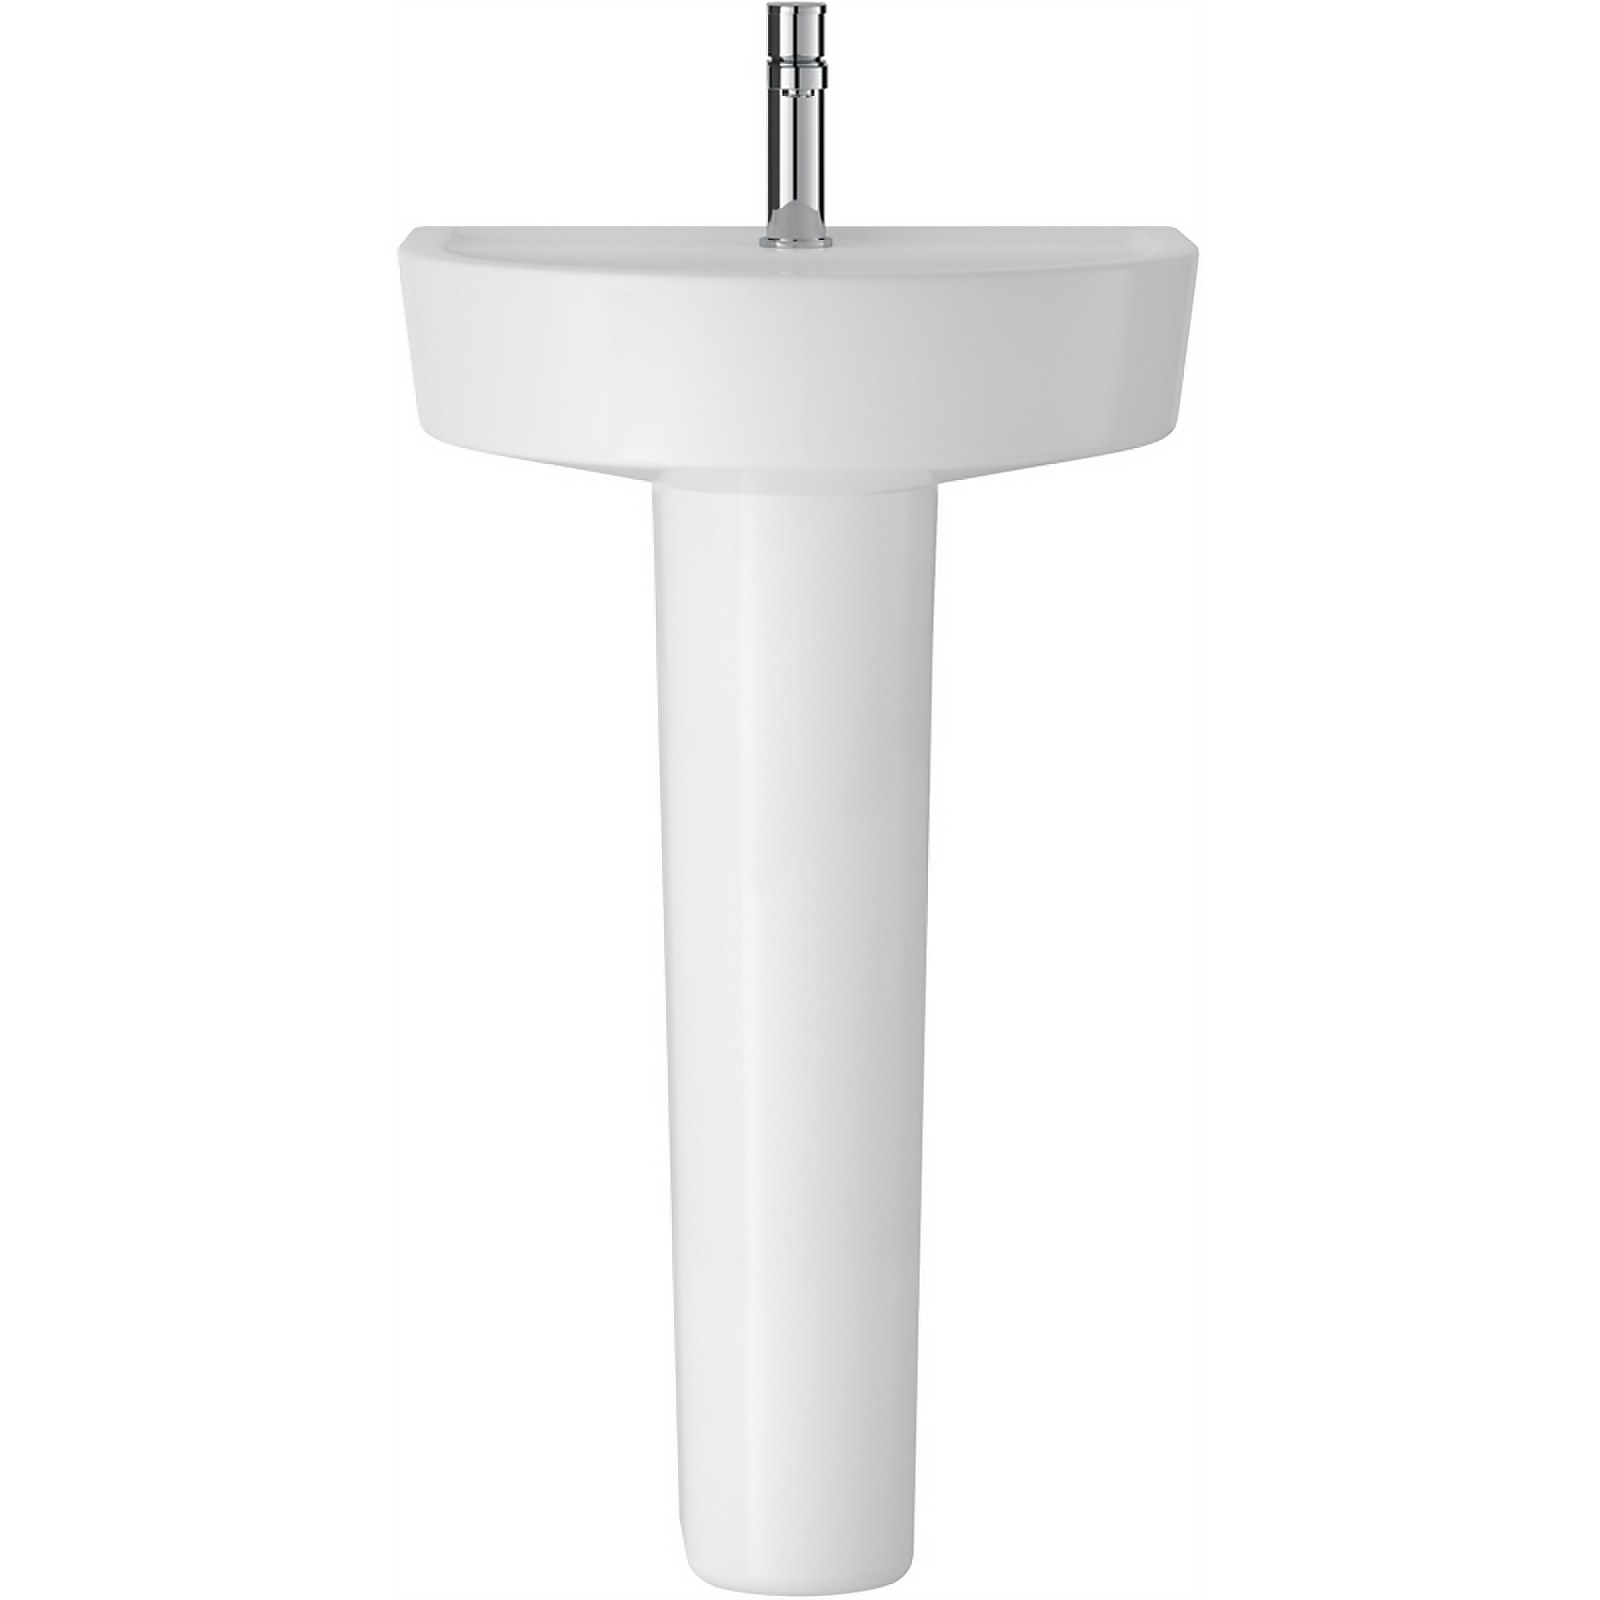 Photo of Balterley Mila 1 Tap Hole Basin And Full Pedestal - 420mm